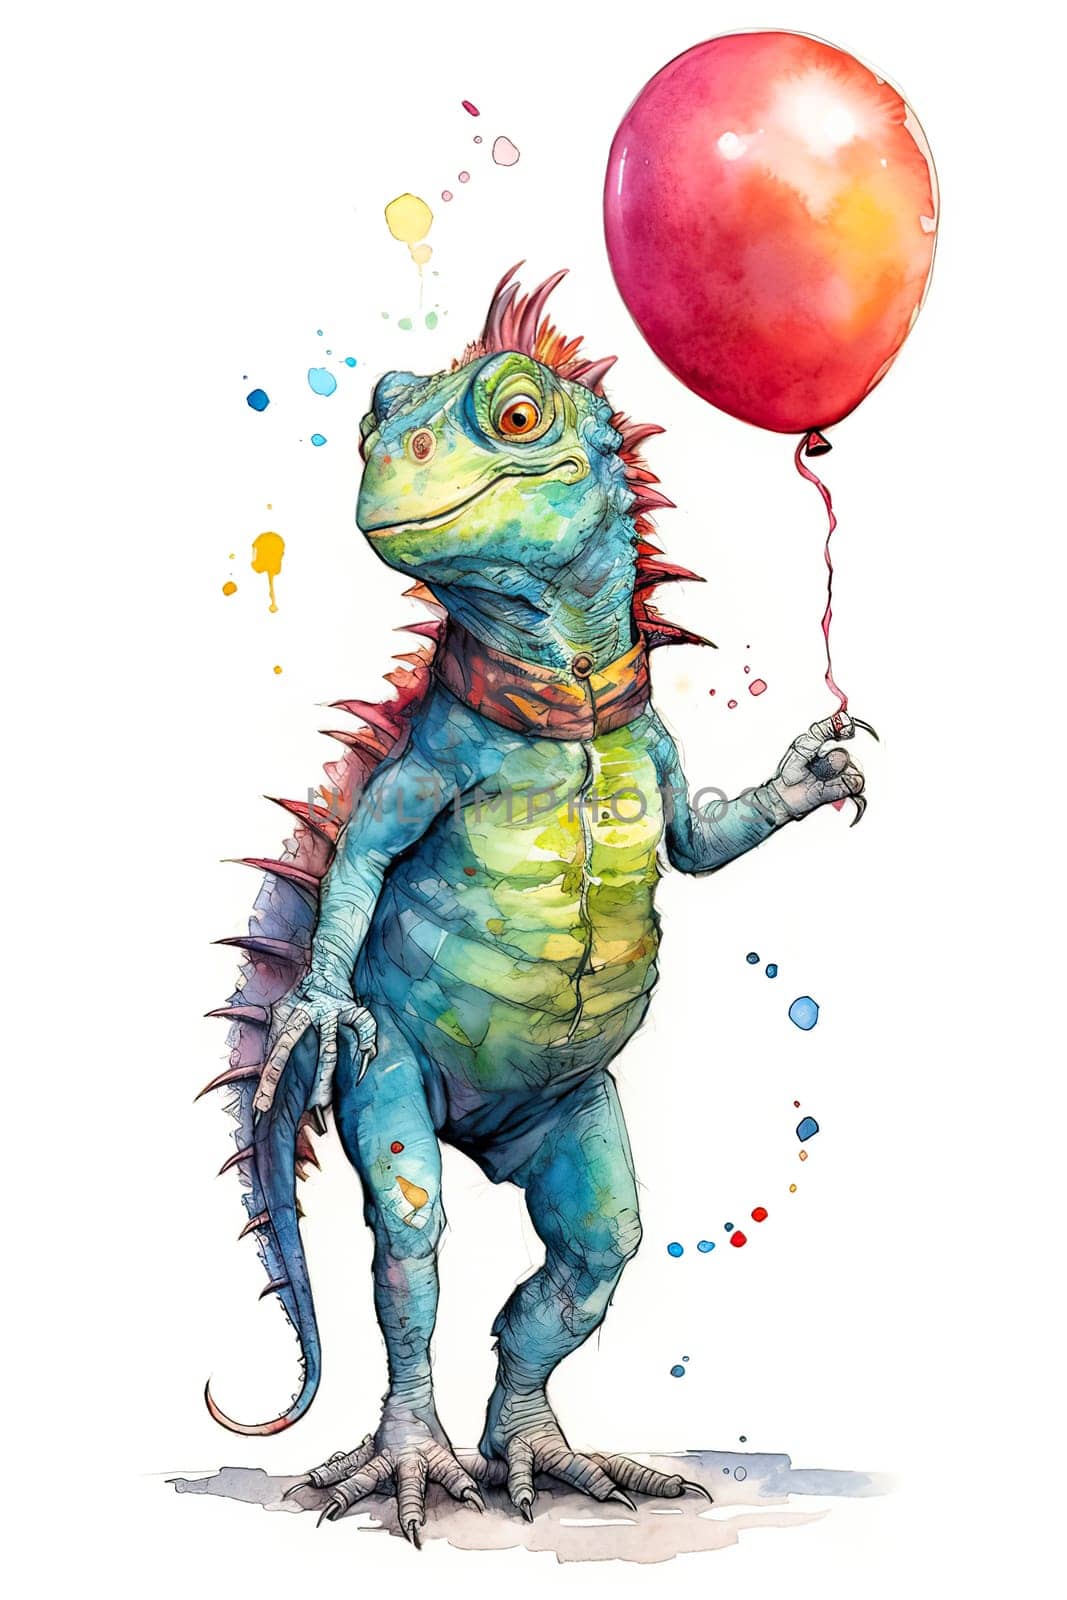 Add a touch of whimsy to your greeting with an adorable watercolor illustration of an iguana with balloons, perfect for any special occasion.